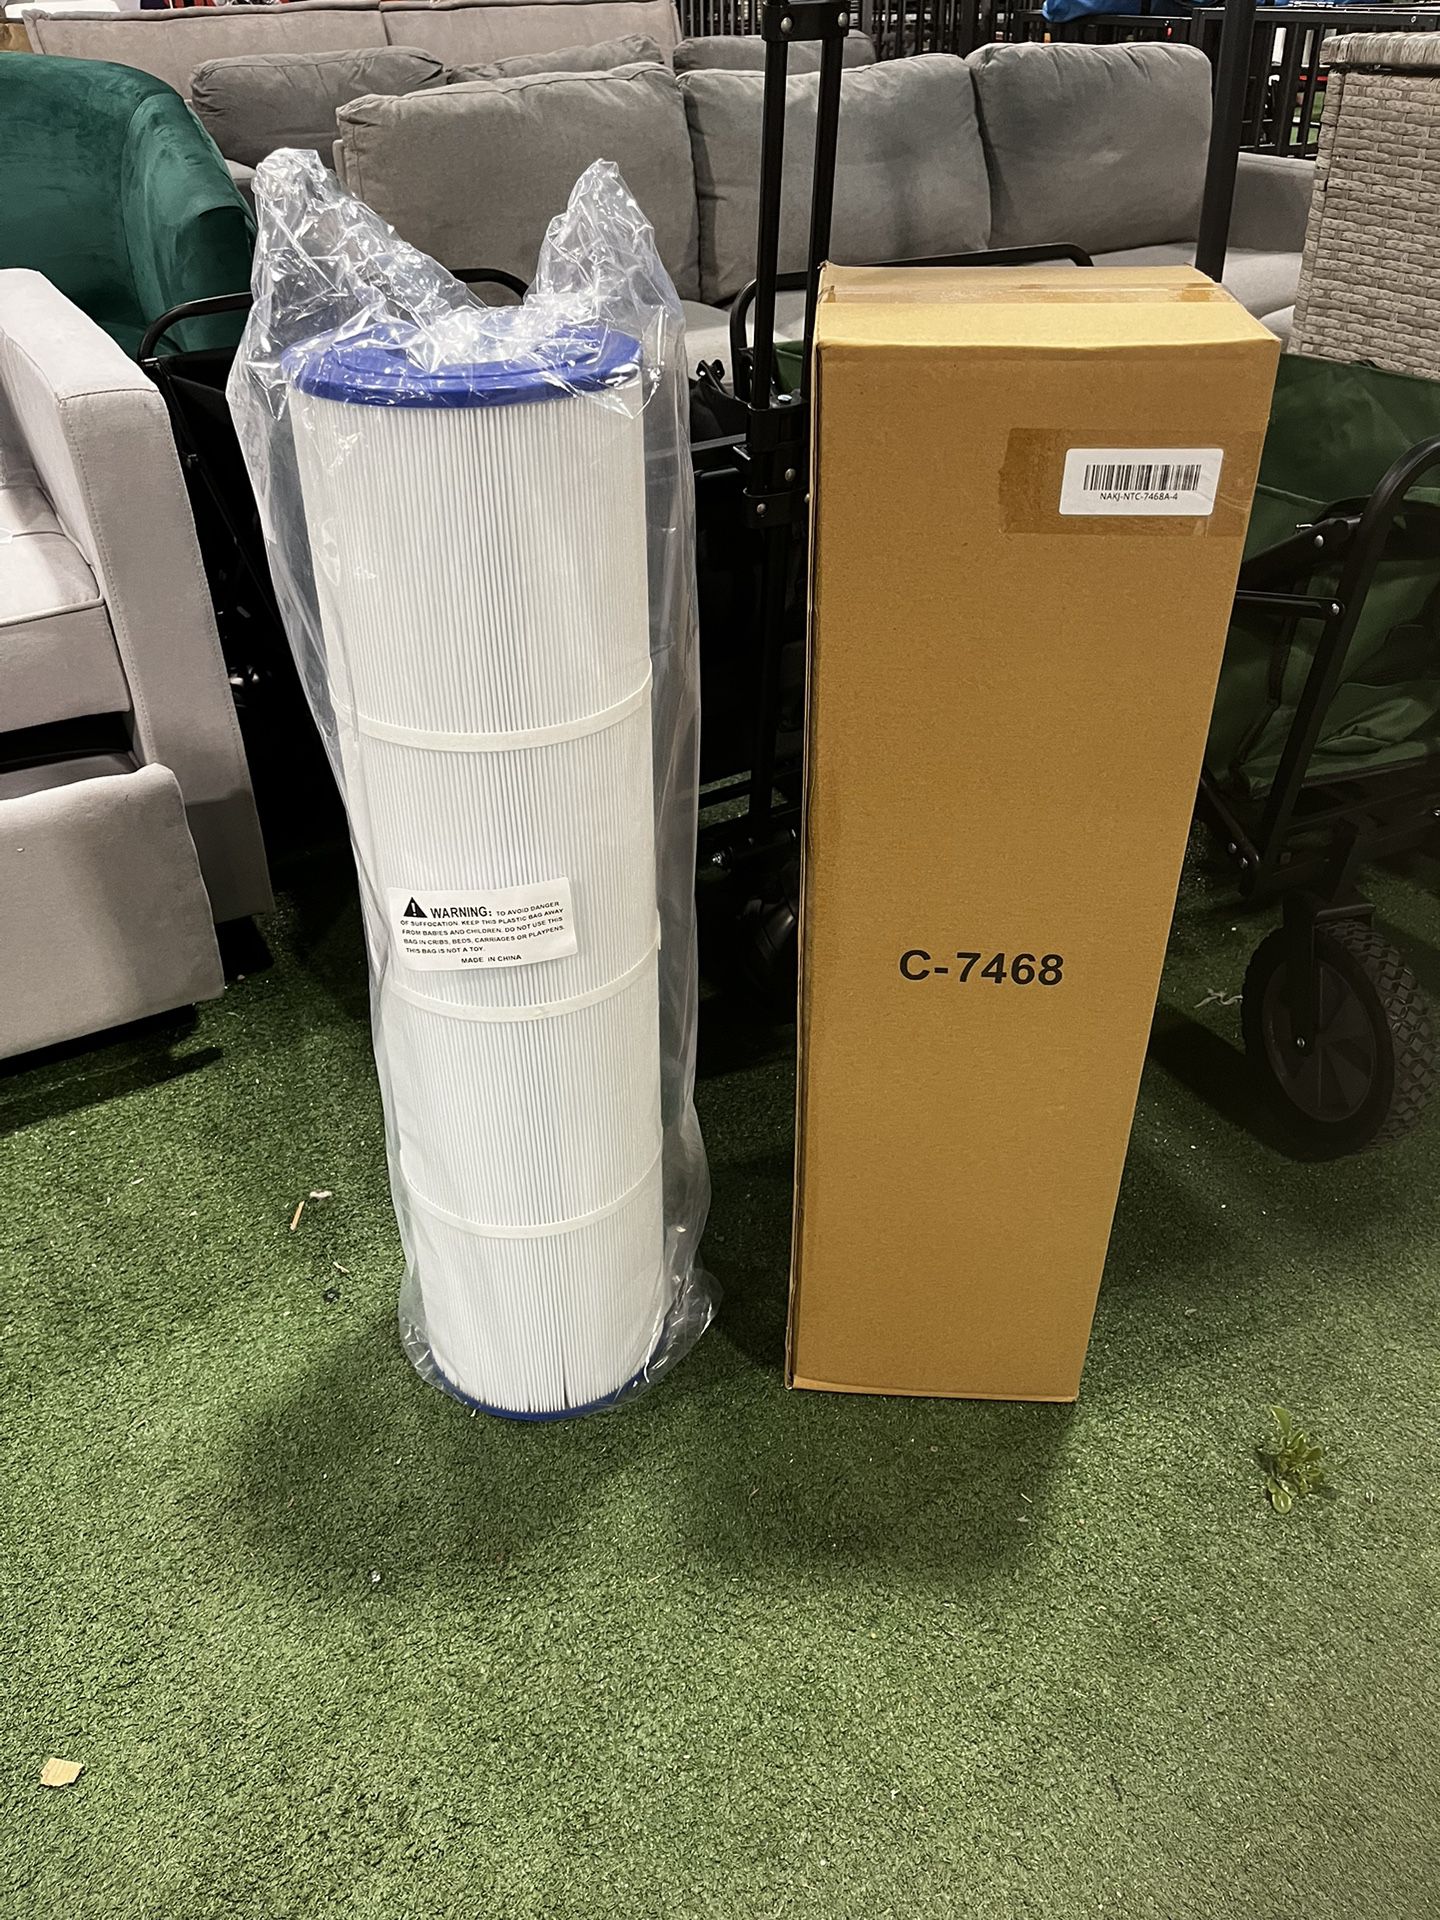 Brand New C-7468 POOL & SPA FILTER REPLACEMENT, $20 Each